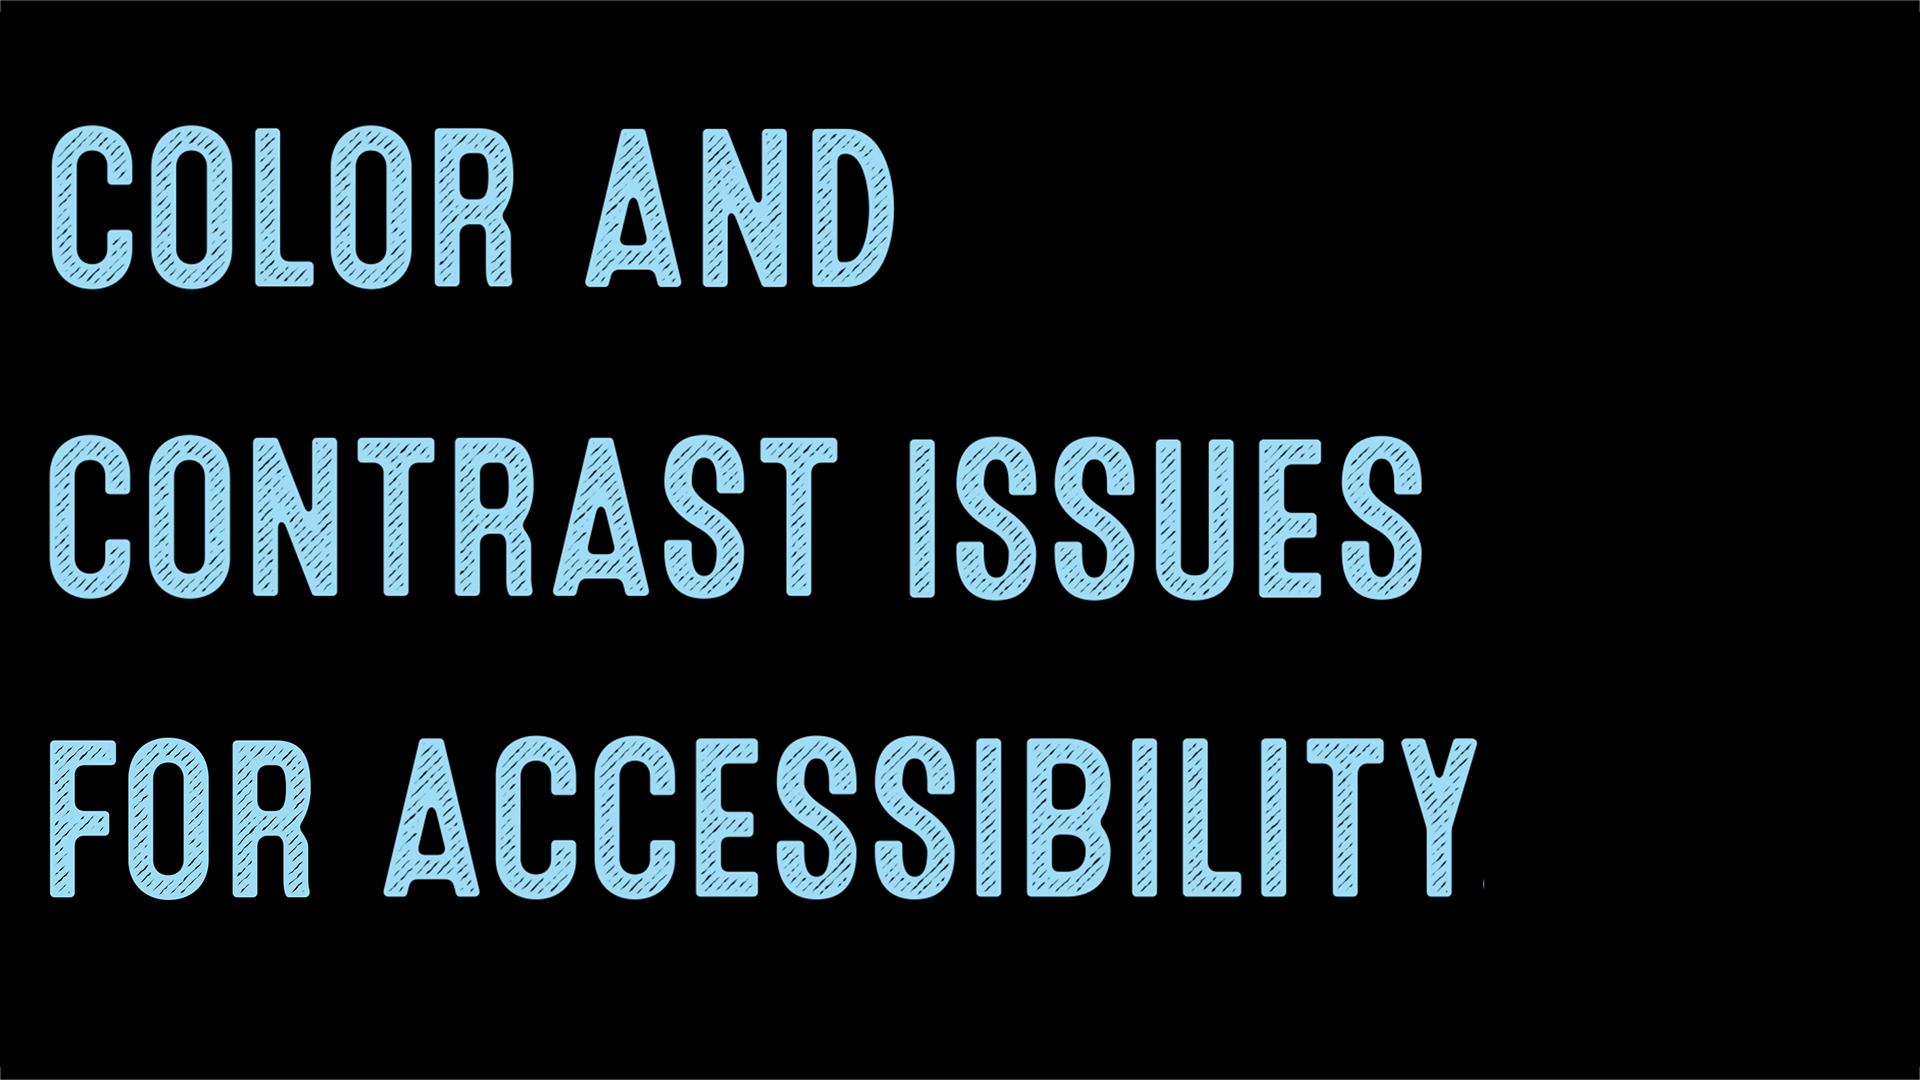 a text only image with blue text over a black bacgkround that states color and contrast issues for accessibility